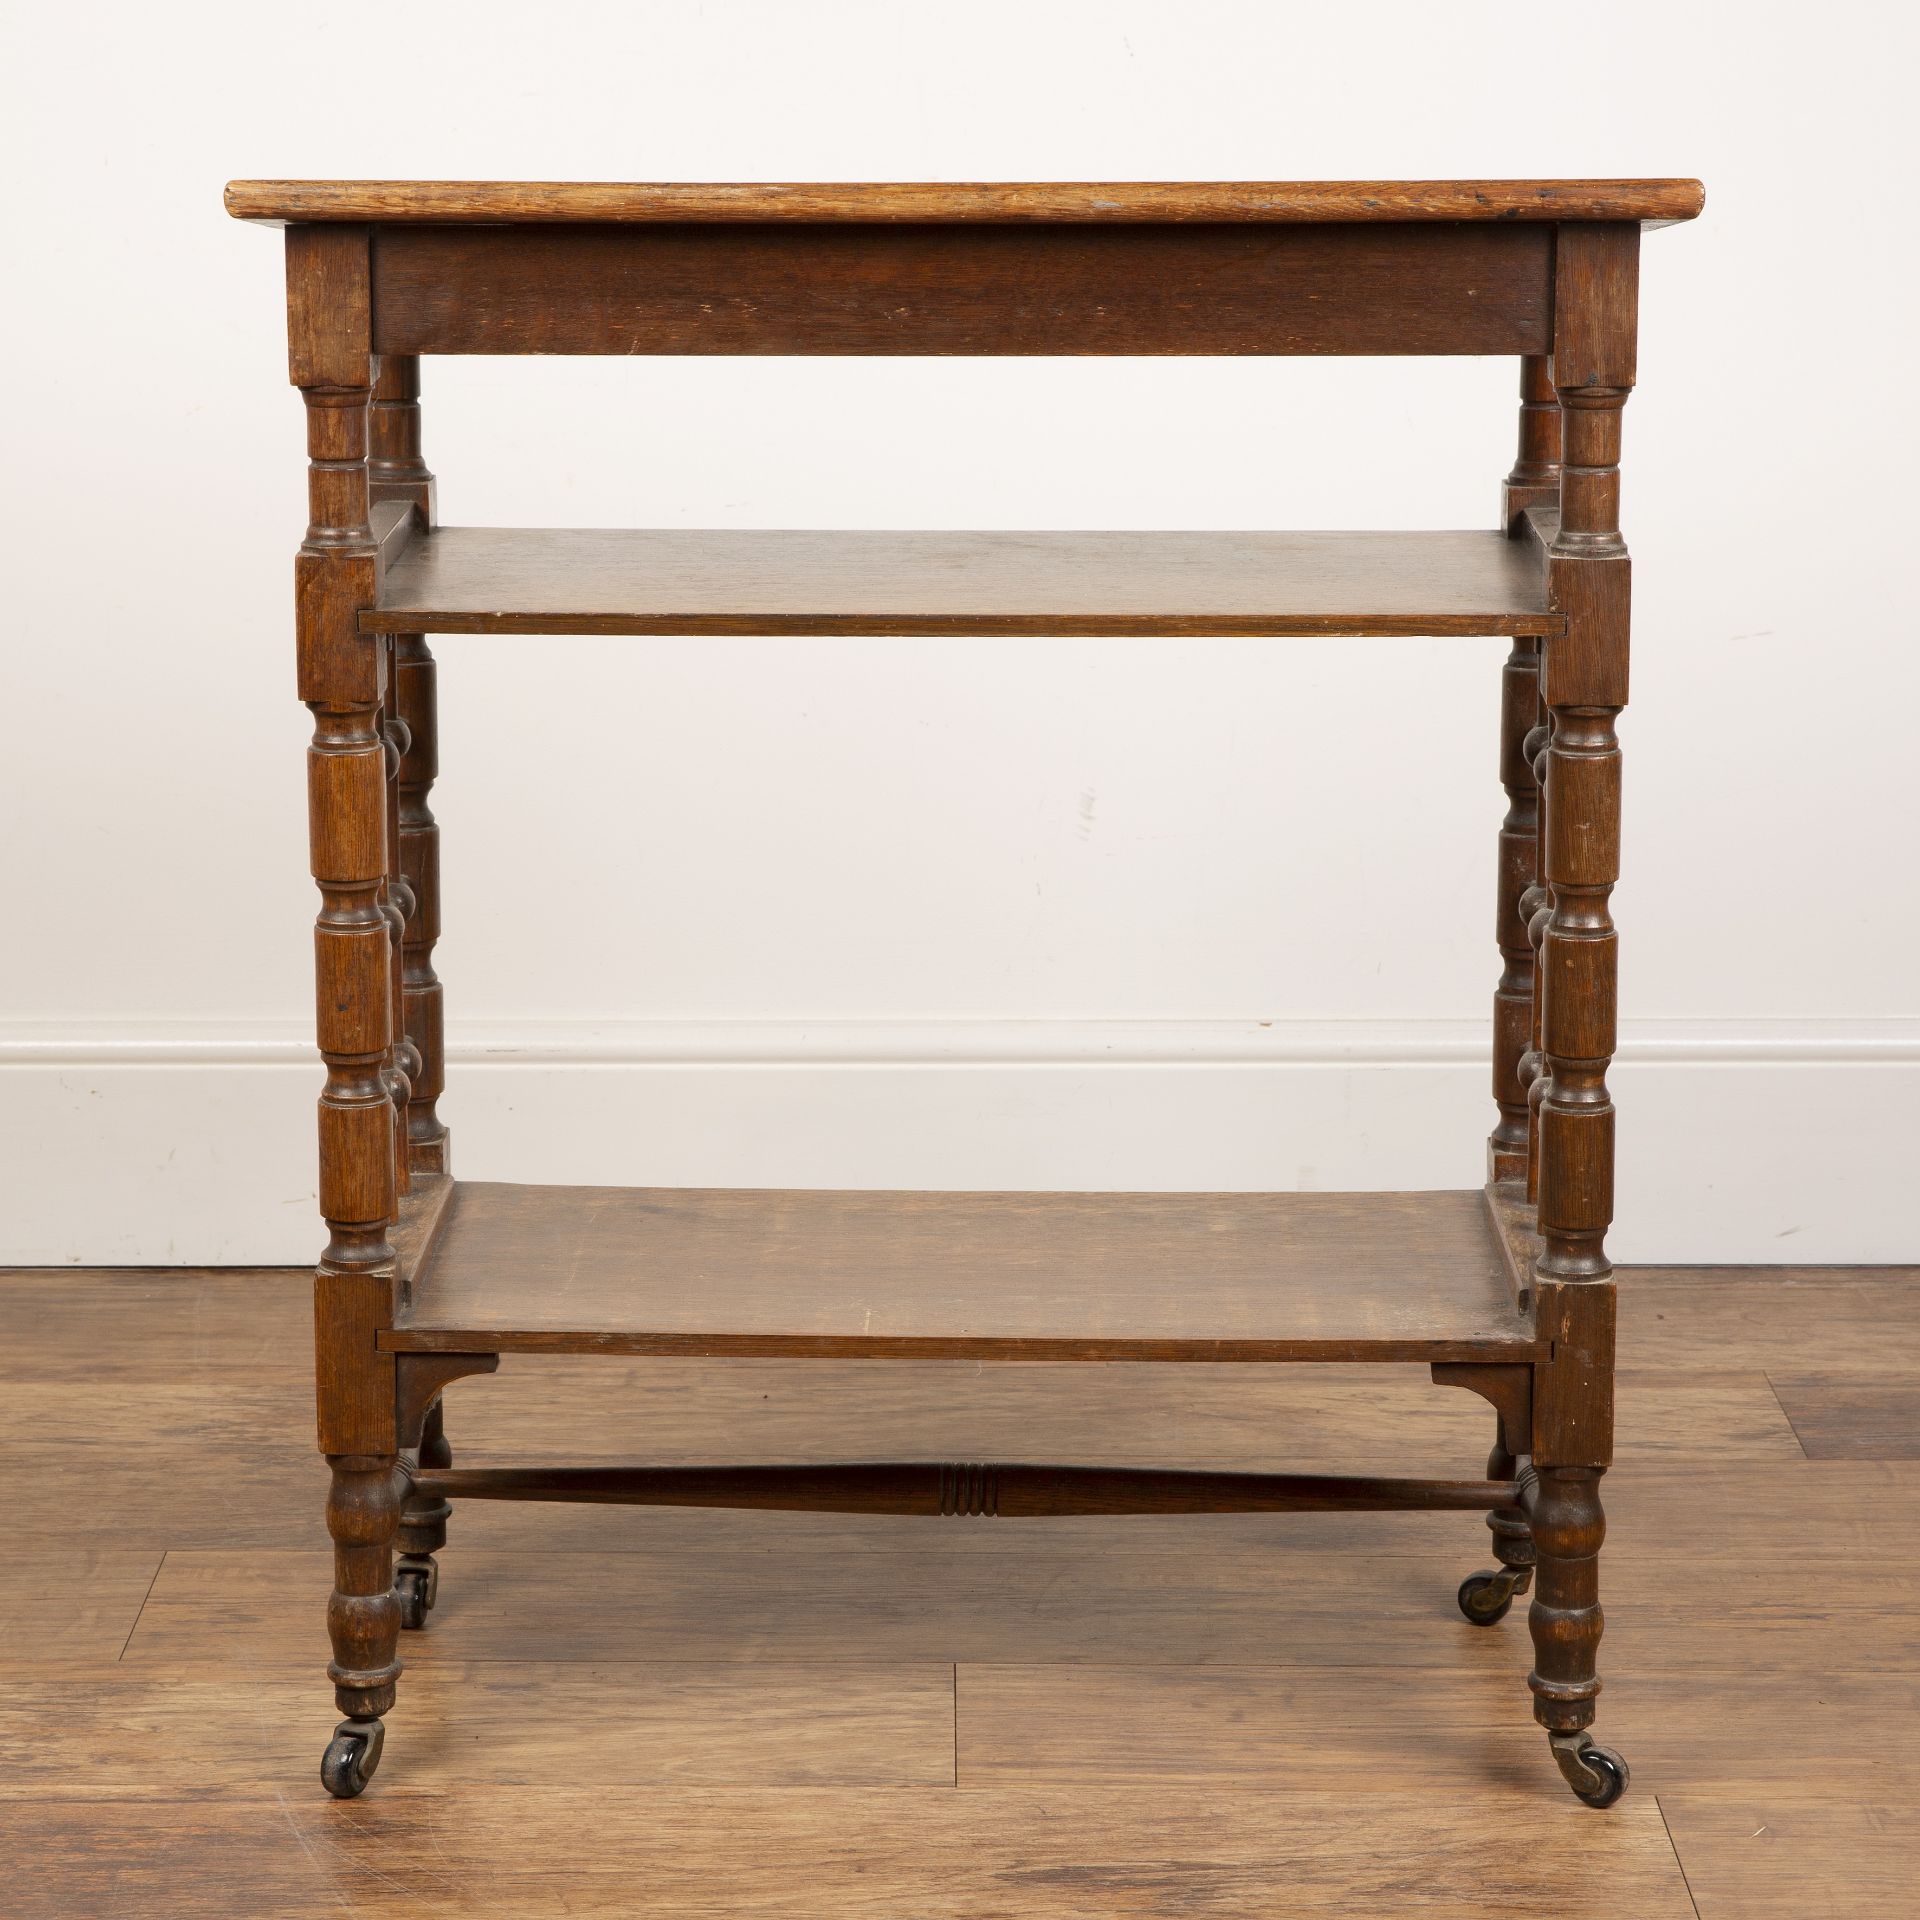 Leonard Wyburd (1865-1958) for Liberty & Co oak bookstand or reading table, with lattice side - Image 2 of 5